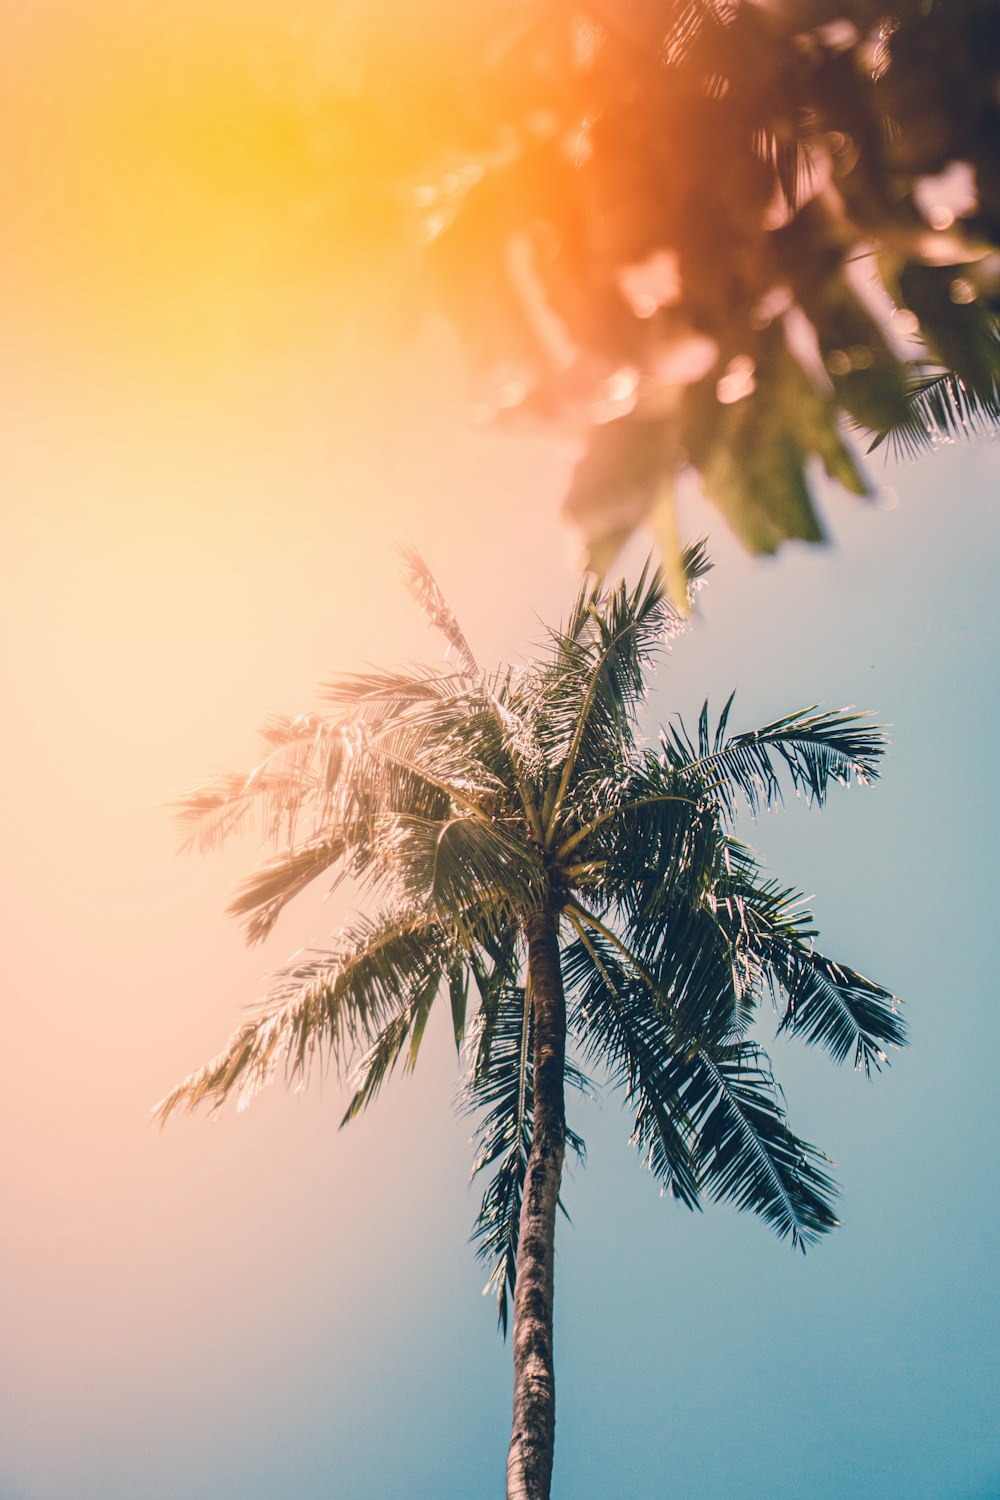 Summer Wallpapers: Free HD Download [500+ HQ]